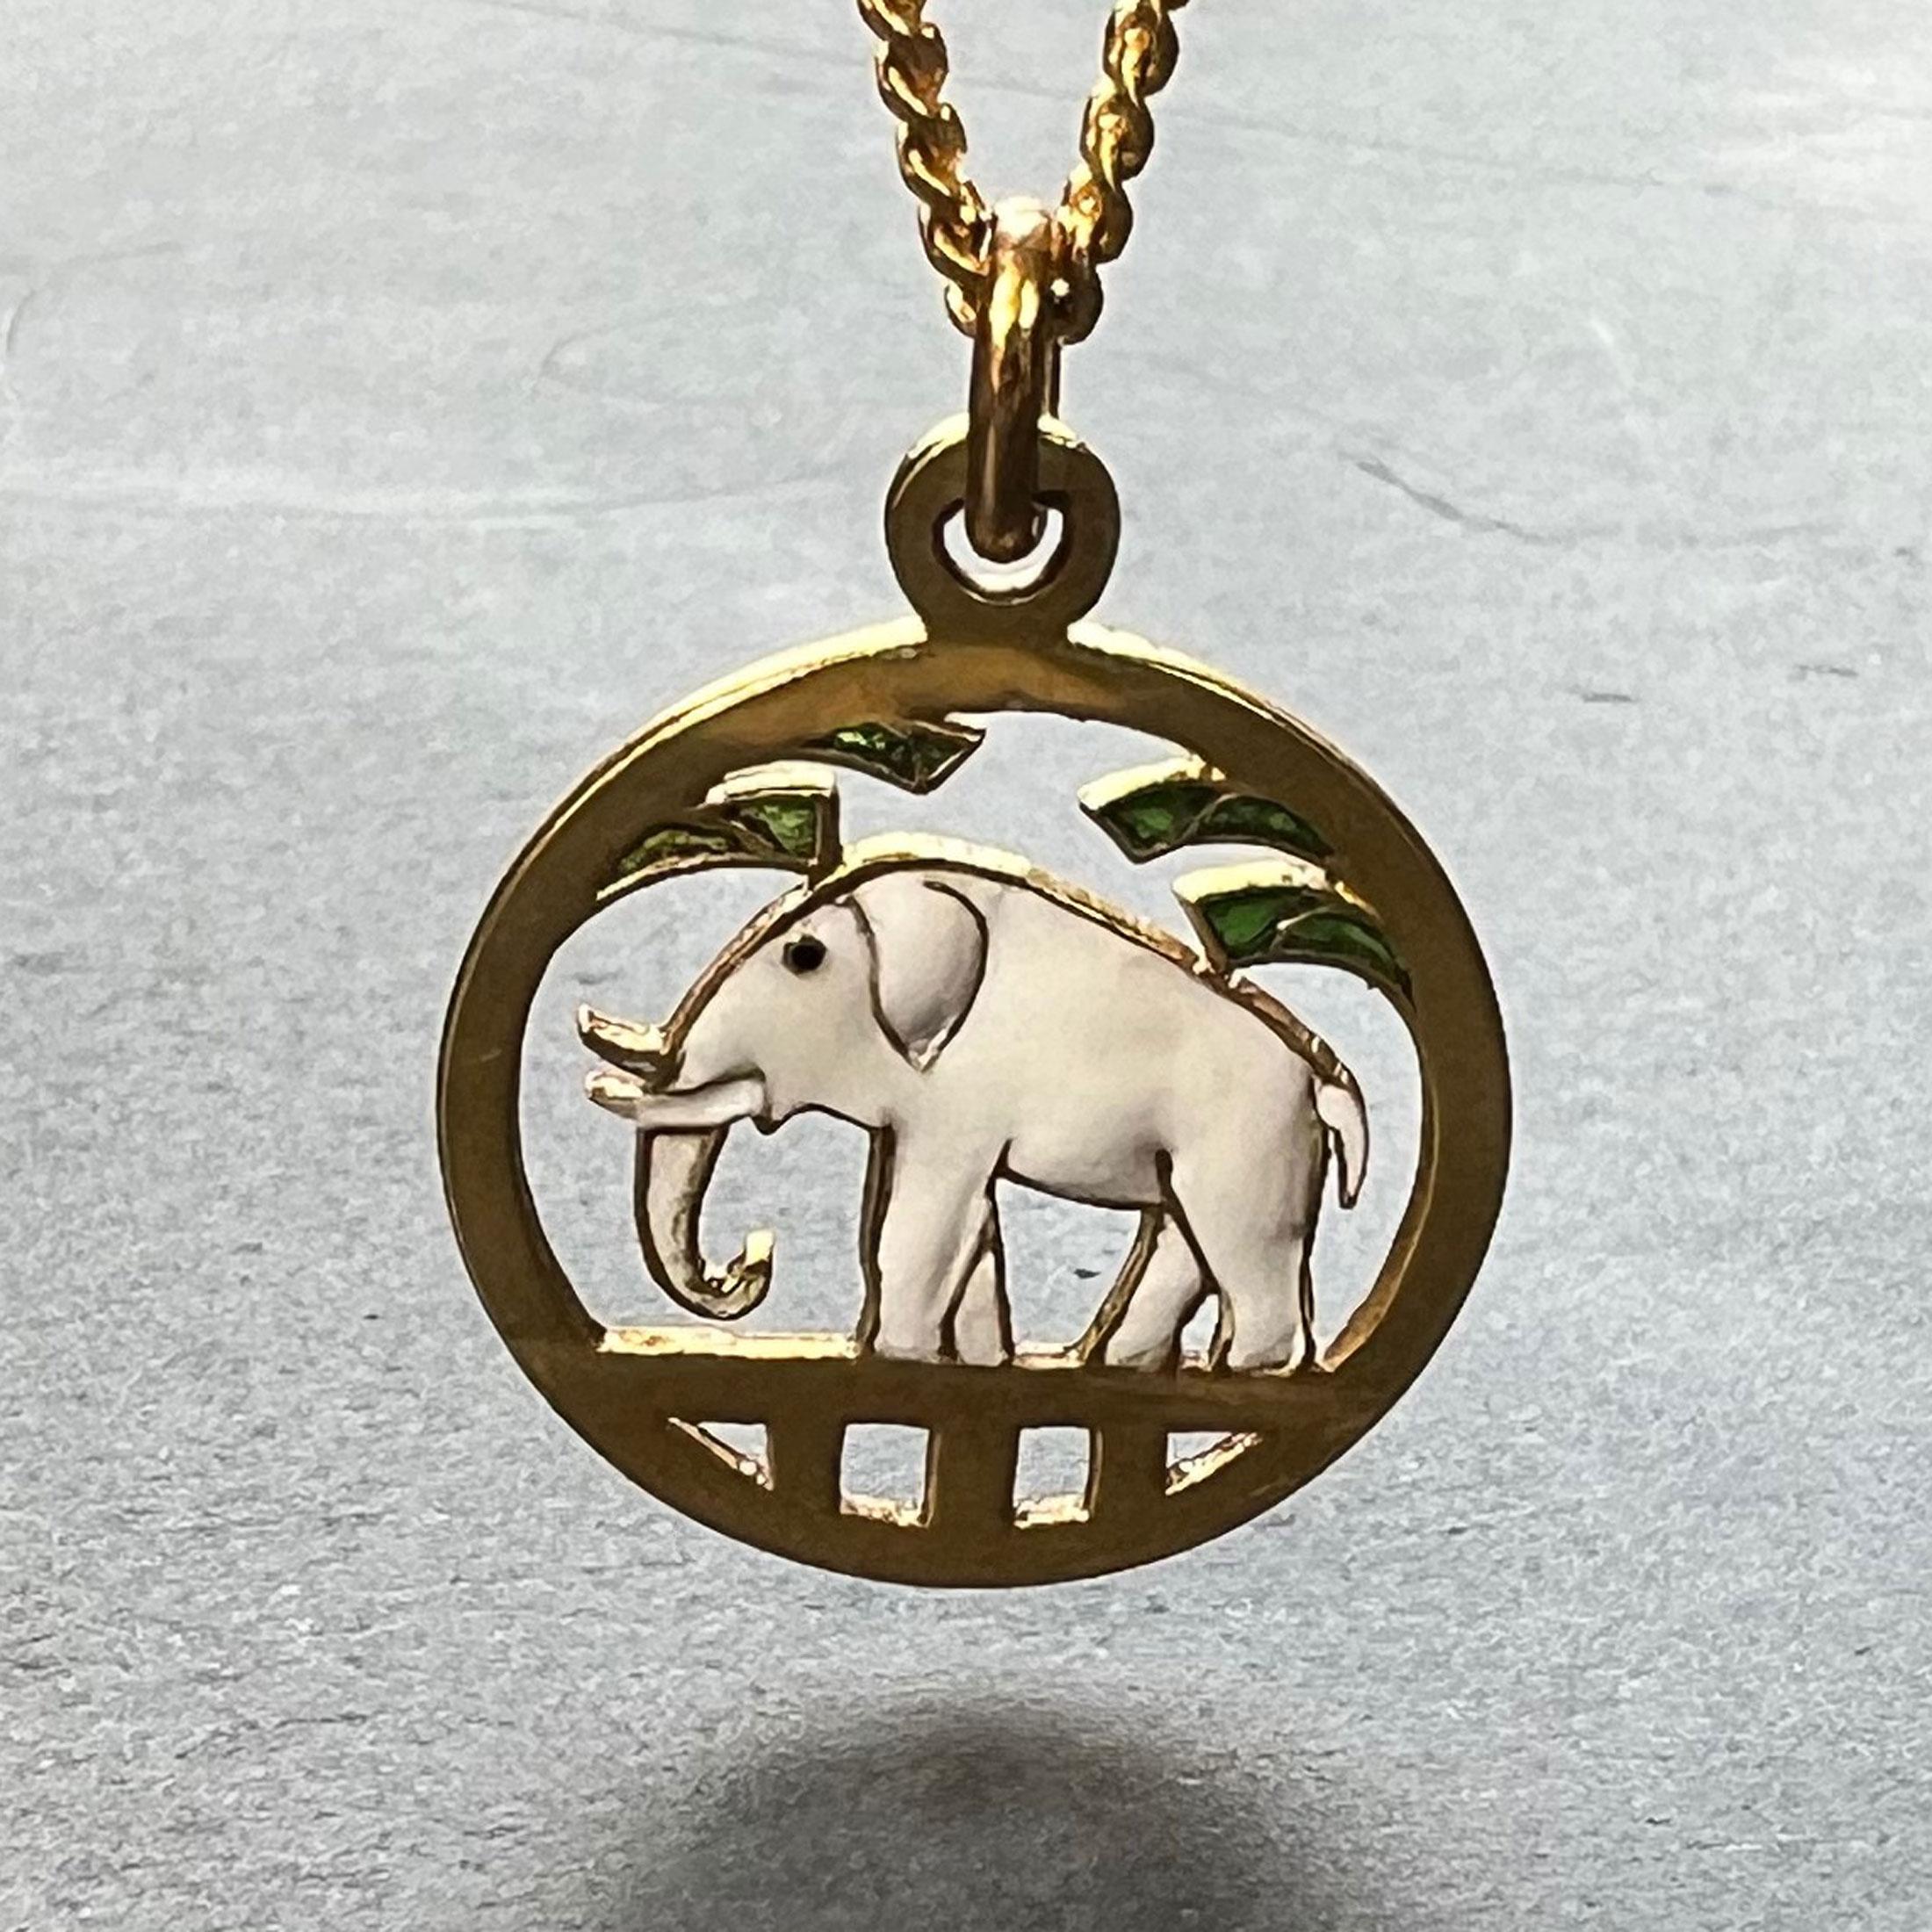 A French 18 karat (18K) yellow gold charm pendant designed as a lucky elephant with white enamel body and black enamel eye within a circular gold frame with green plique-a-jour tree branches. Stamped with the eagle's head for 18 karat gold and